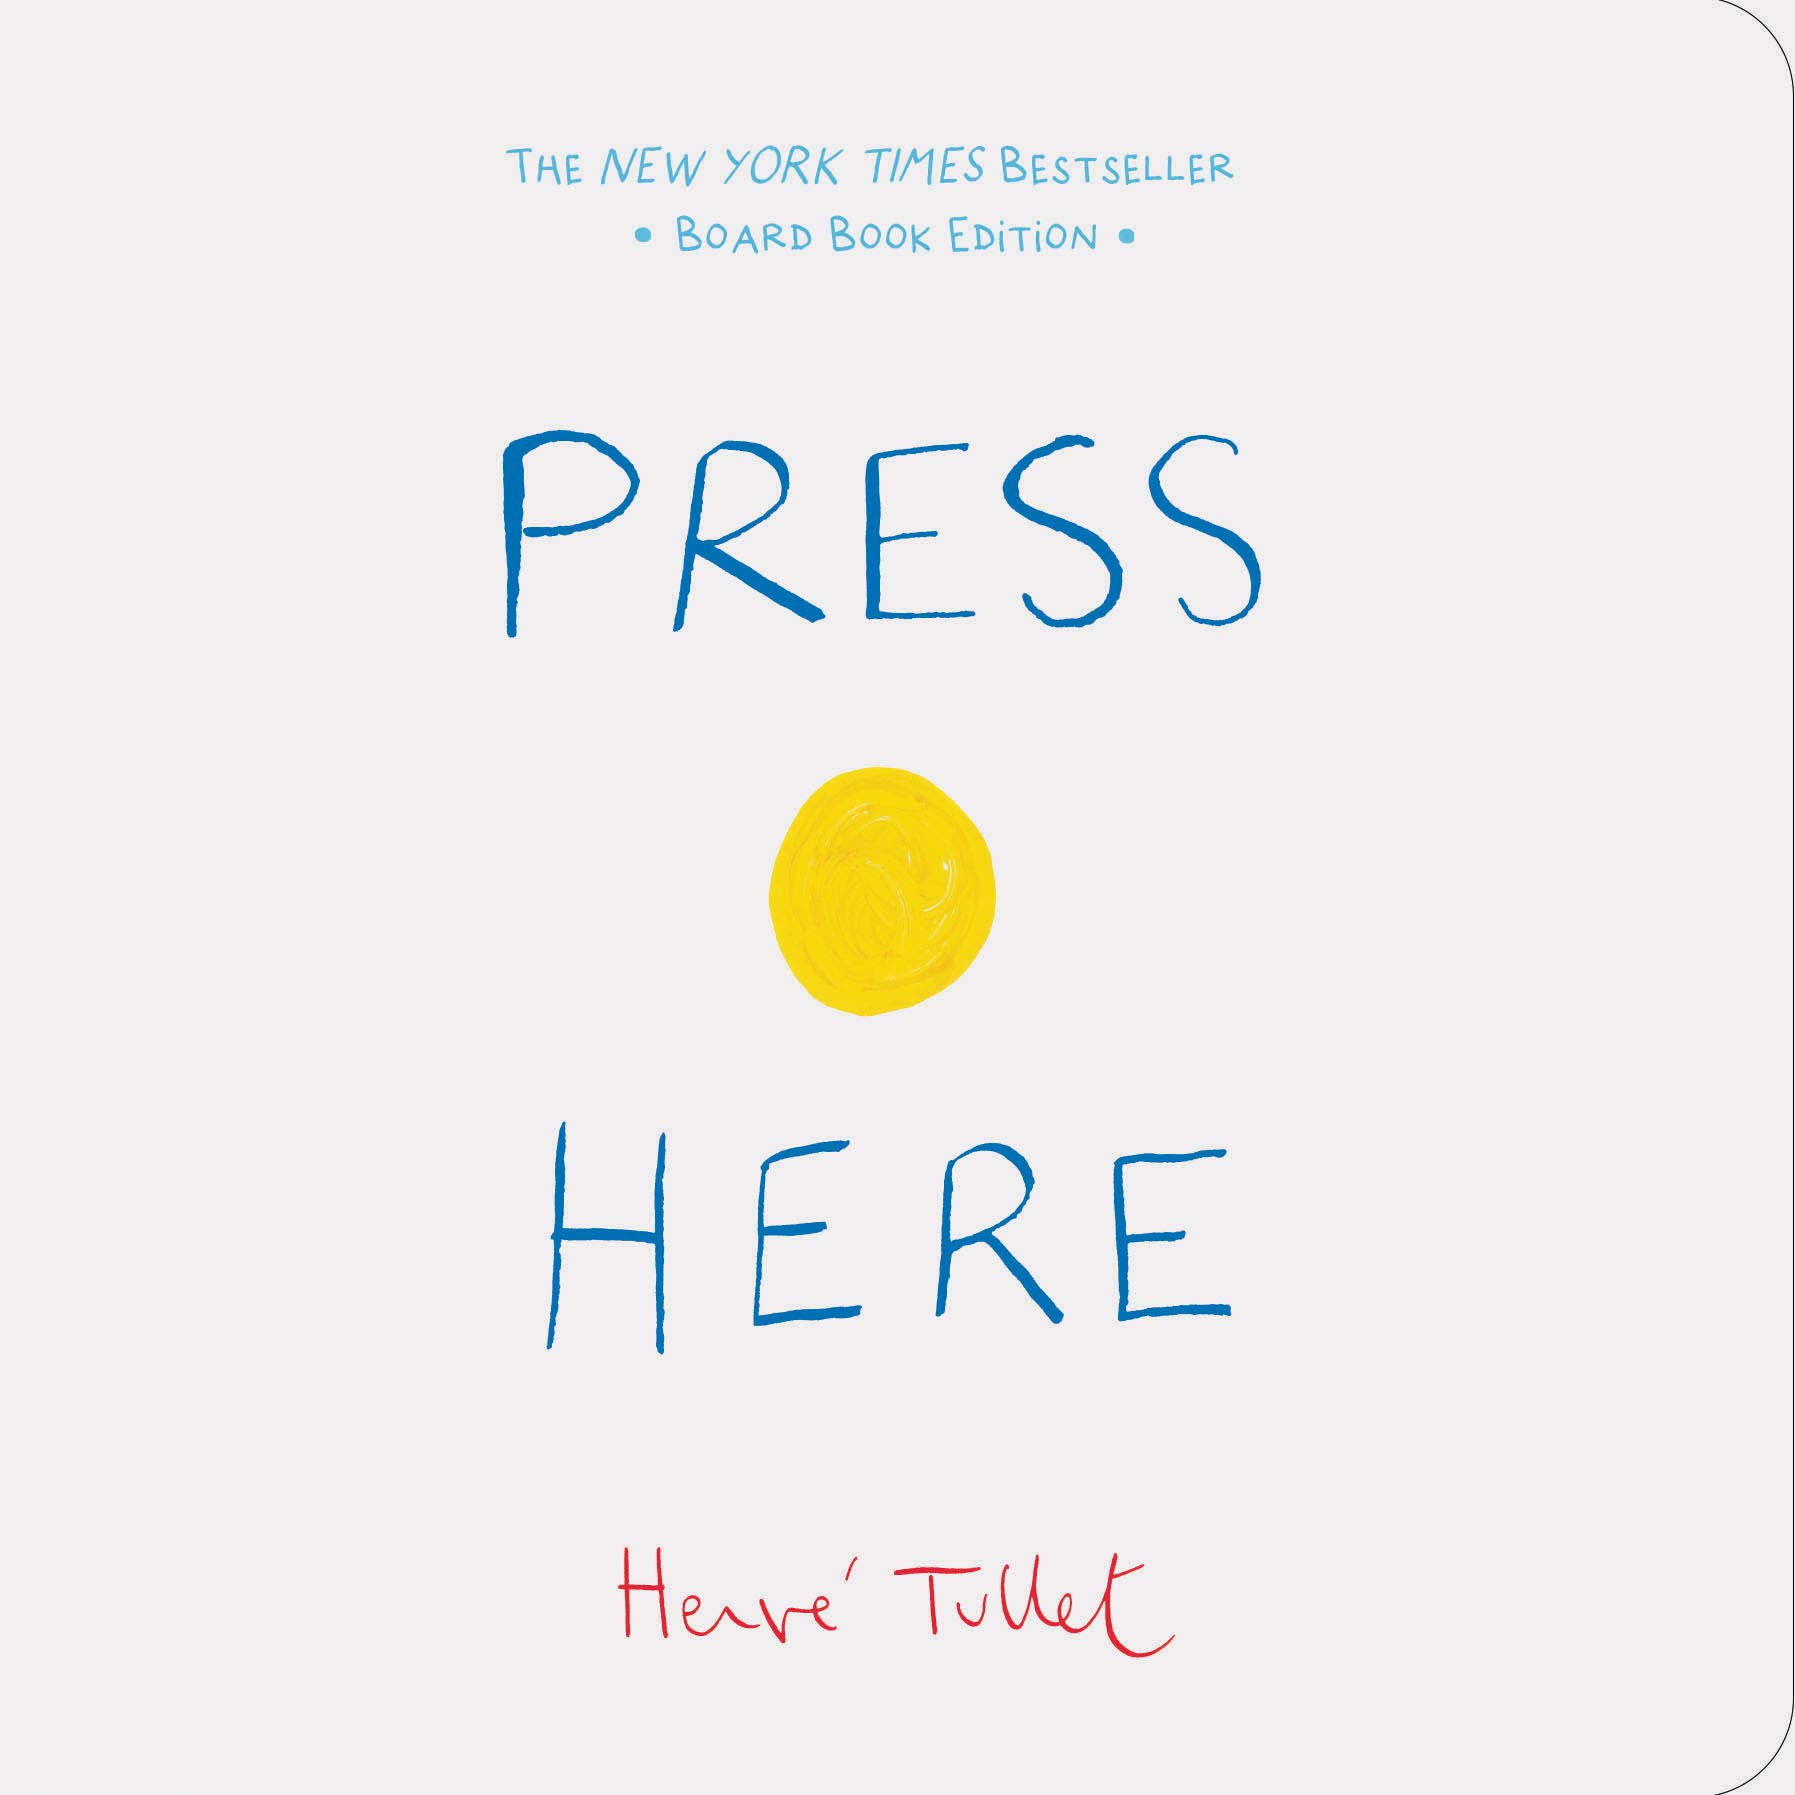 "Press Here" by Herve Tullet